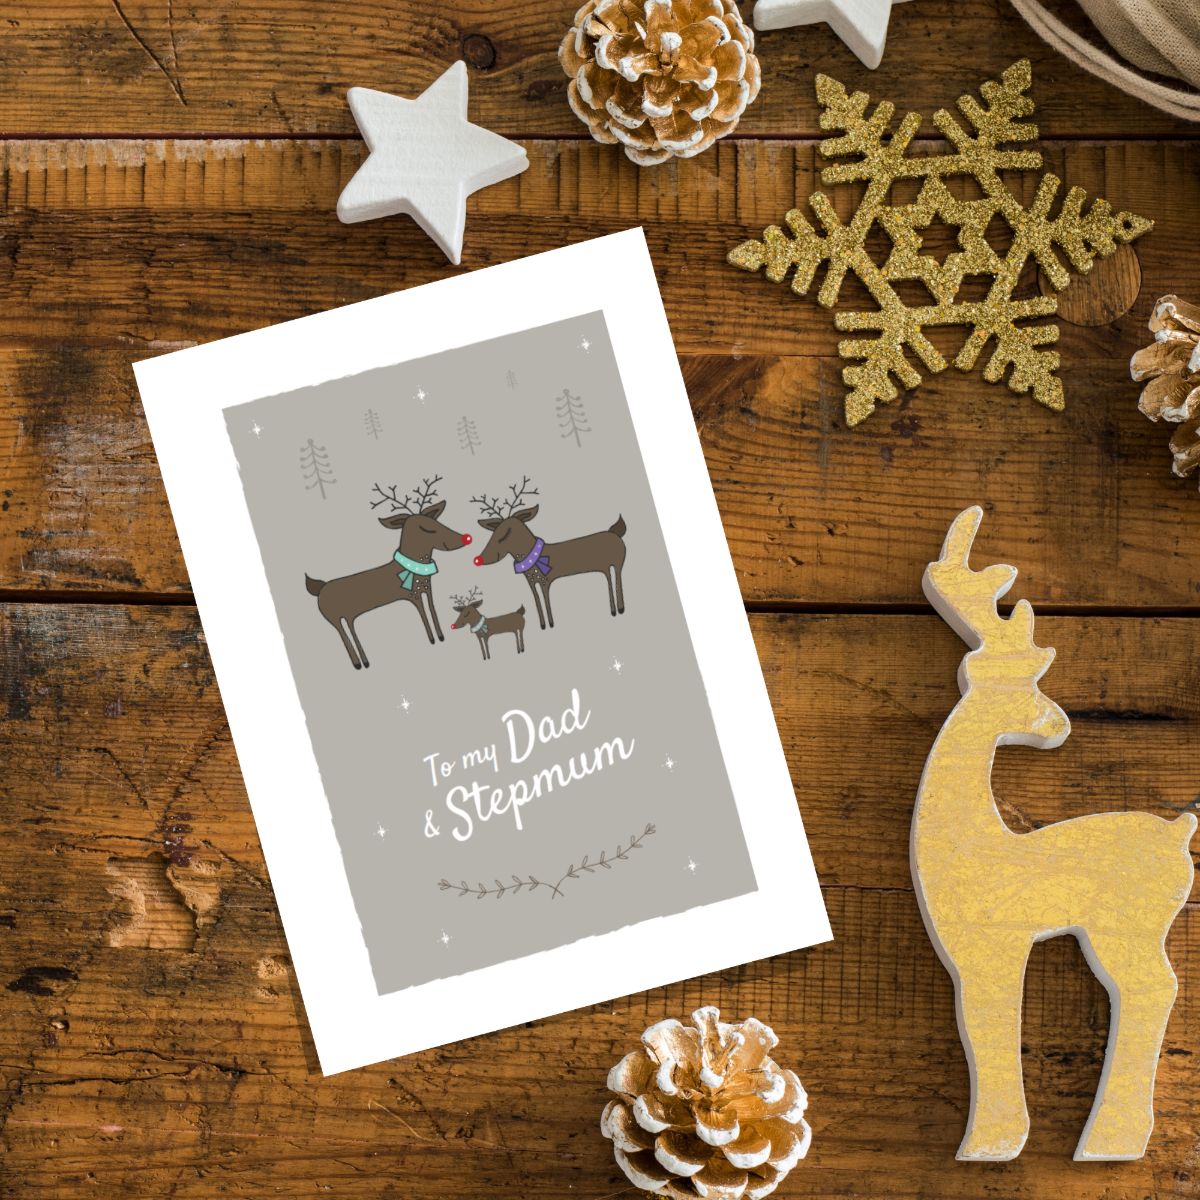 Dad and his Wife Christmas Card Reindeer Design